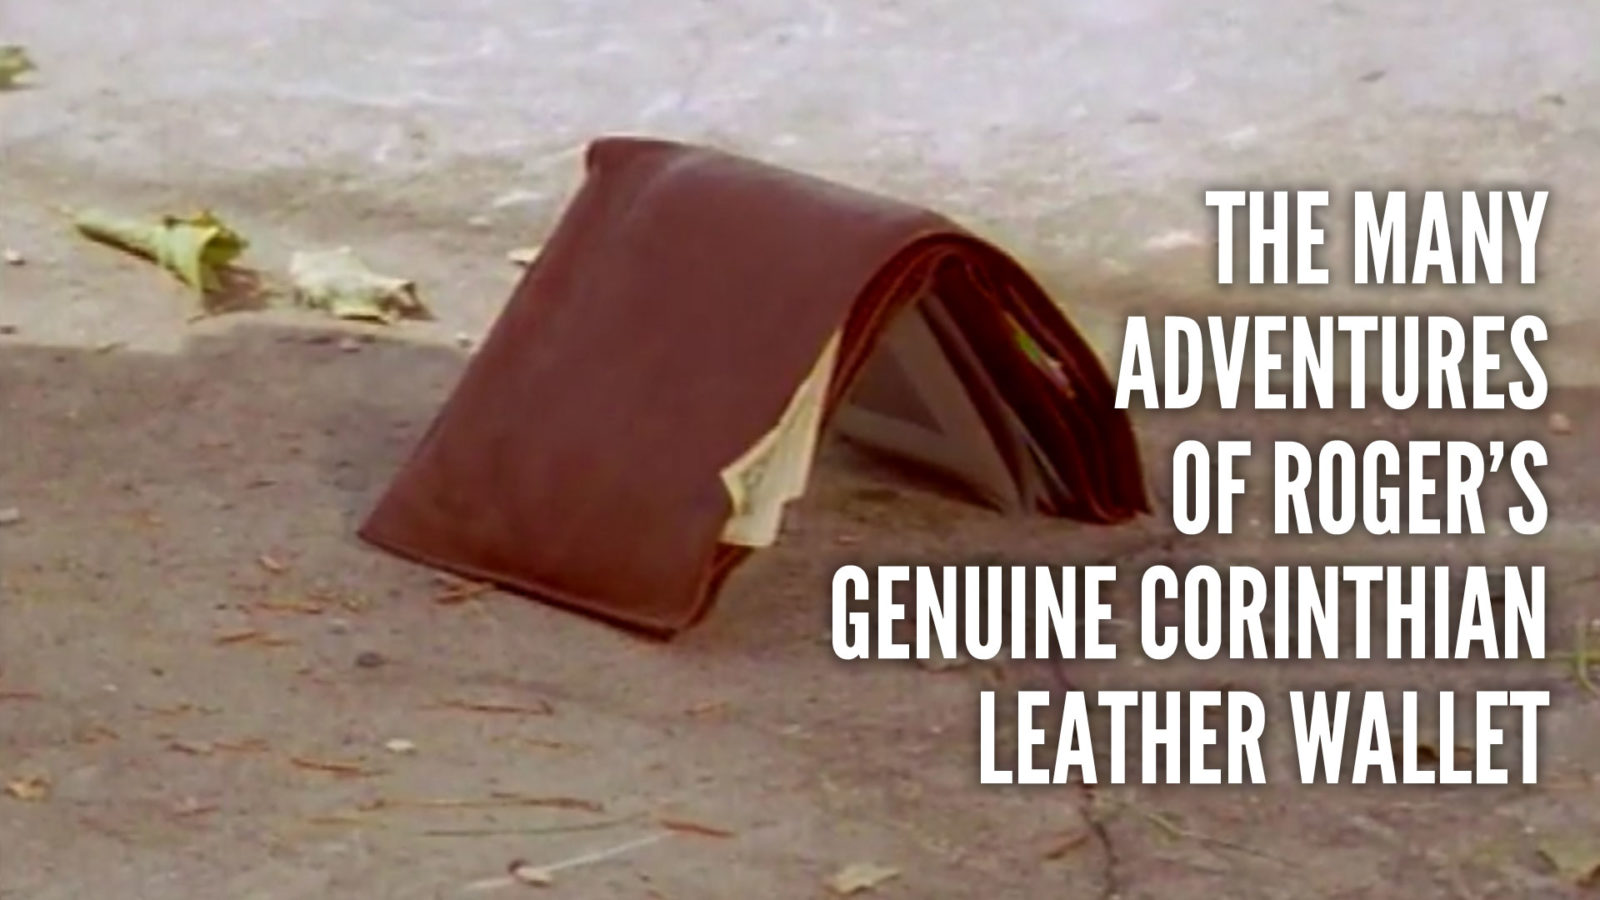 The Many Adventures of Roger's Genuine Corinthian Leather Wallet